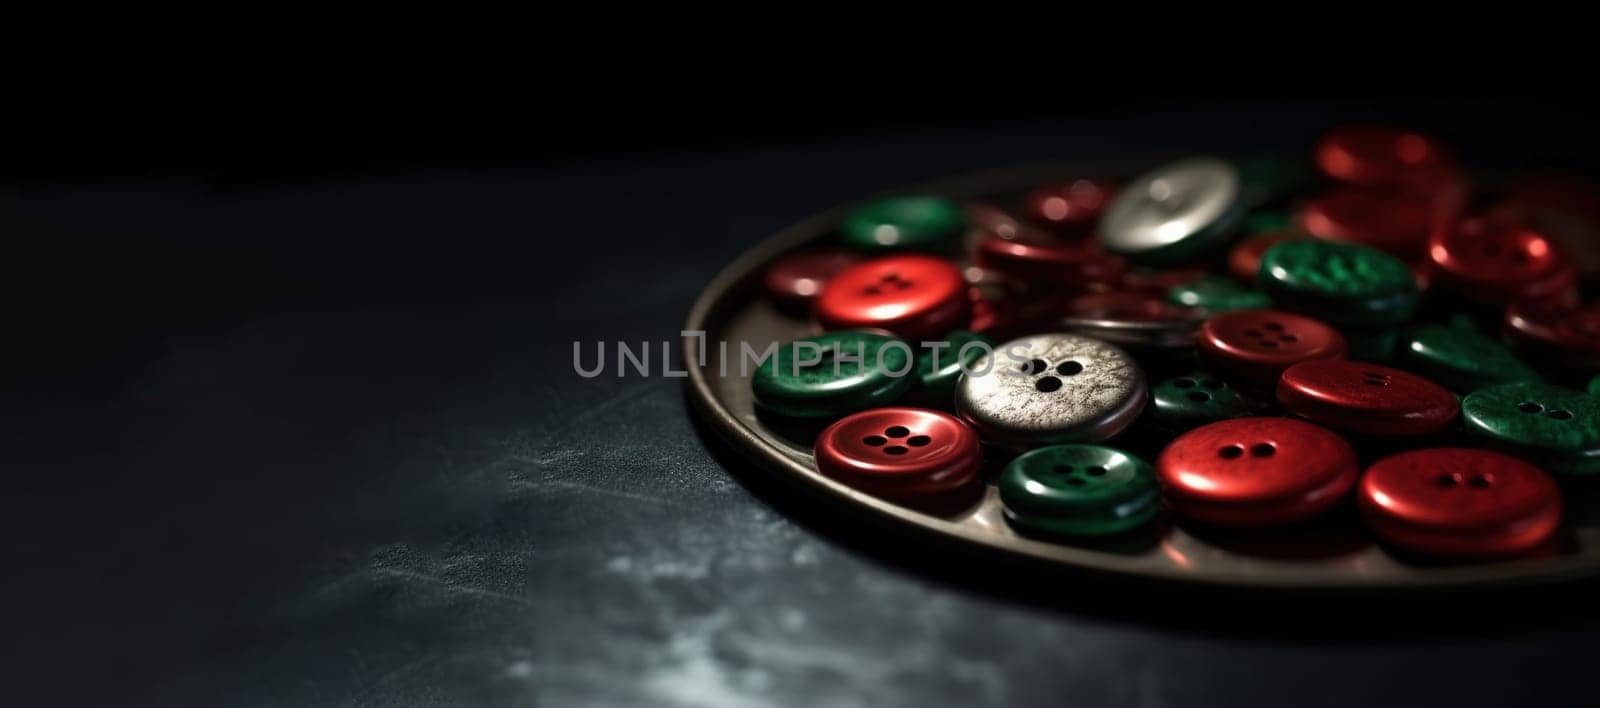 green and red clothes buttons by tan4ikk1